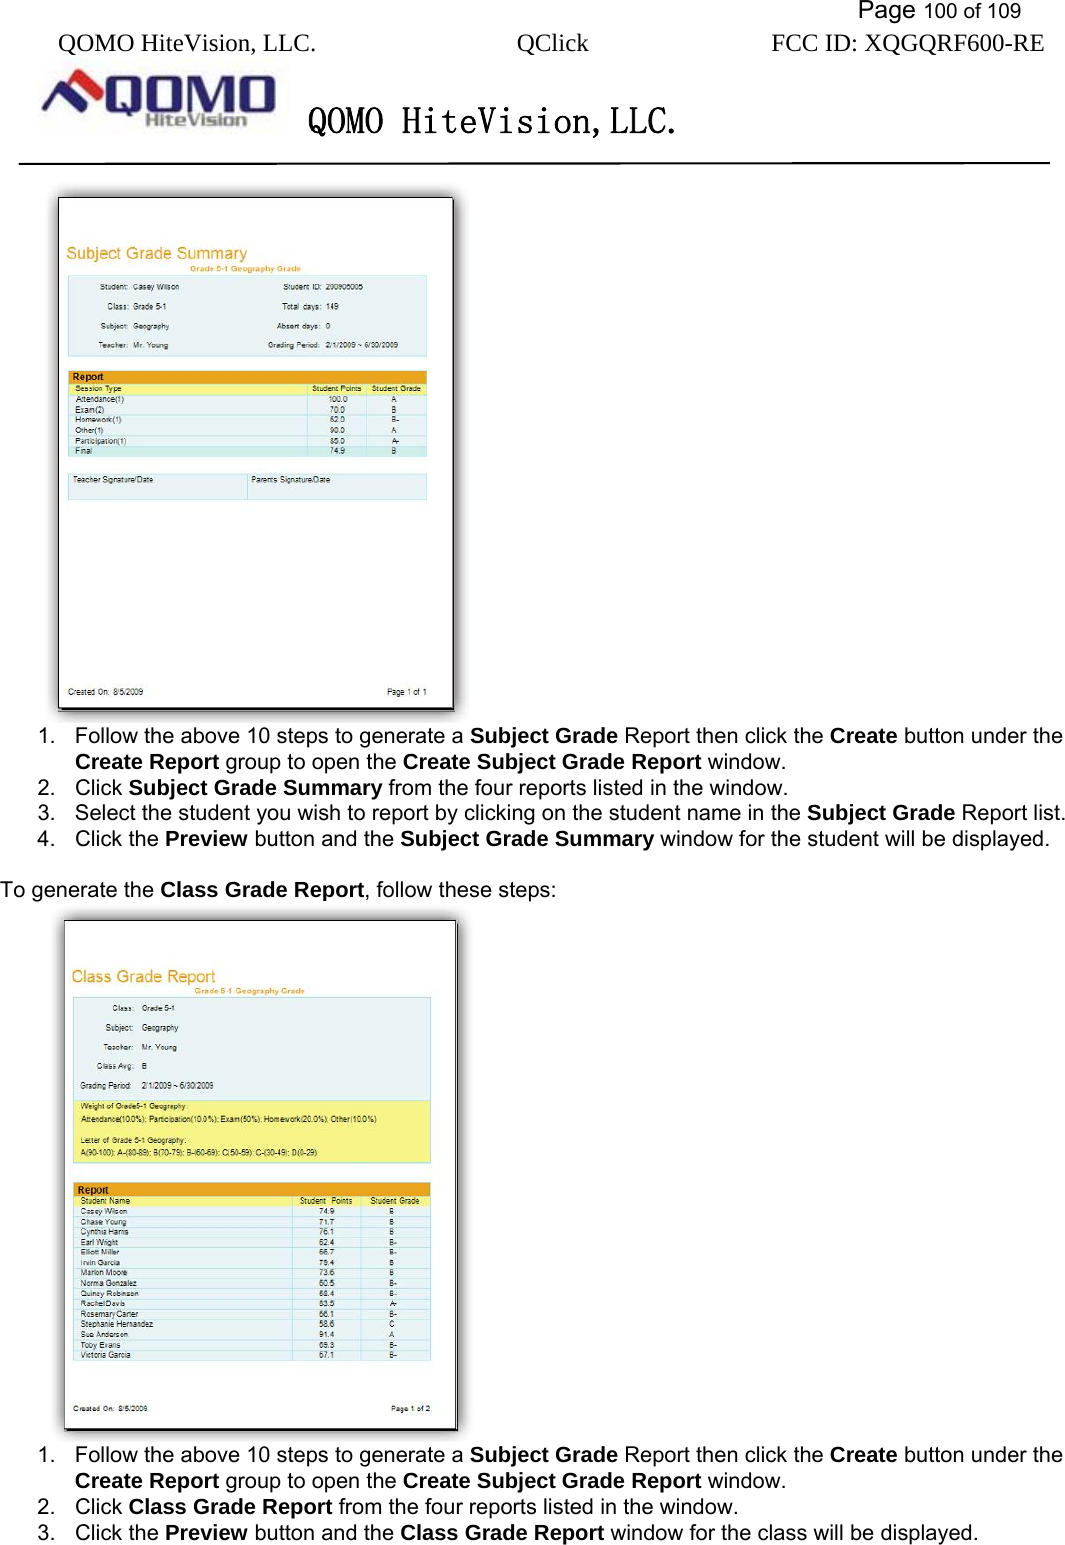           Page 100 of 109 QOMO HiteVision, LLC.  QClick        FCC ID: XQGQRF600-RE     QOMO HiteVision,LLC.    1.  Follow the above 10 steps to generate a Subject Grade Report then click the Create button under the Create Report group to open the Create Subject Grade Report window. 2. Click Subject Grade Summary from the four reports listed in the window. 3.  Select the student you wish to report by clicking on the student name in the Subject Grade Report list. 4. Click the Preview button and the Subject Grade Summary window for the student will be displayed.  To generate the Class Grade Report, follow these steps:  1.  Follow the above 10 steps to generate a Subject Grade Report then click the Create button under the Create Report group to open the Create Subject Grade Report window. 2. Click Class Grade Report from the four reports listed in the window. 3. Click the Preview button and the Class Grade Report window for the class will be displayed.  